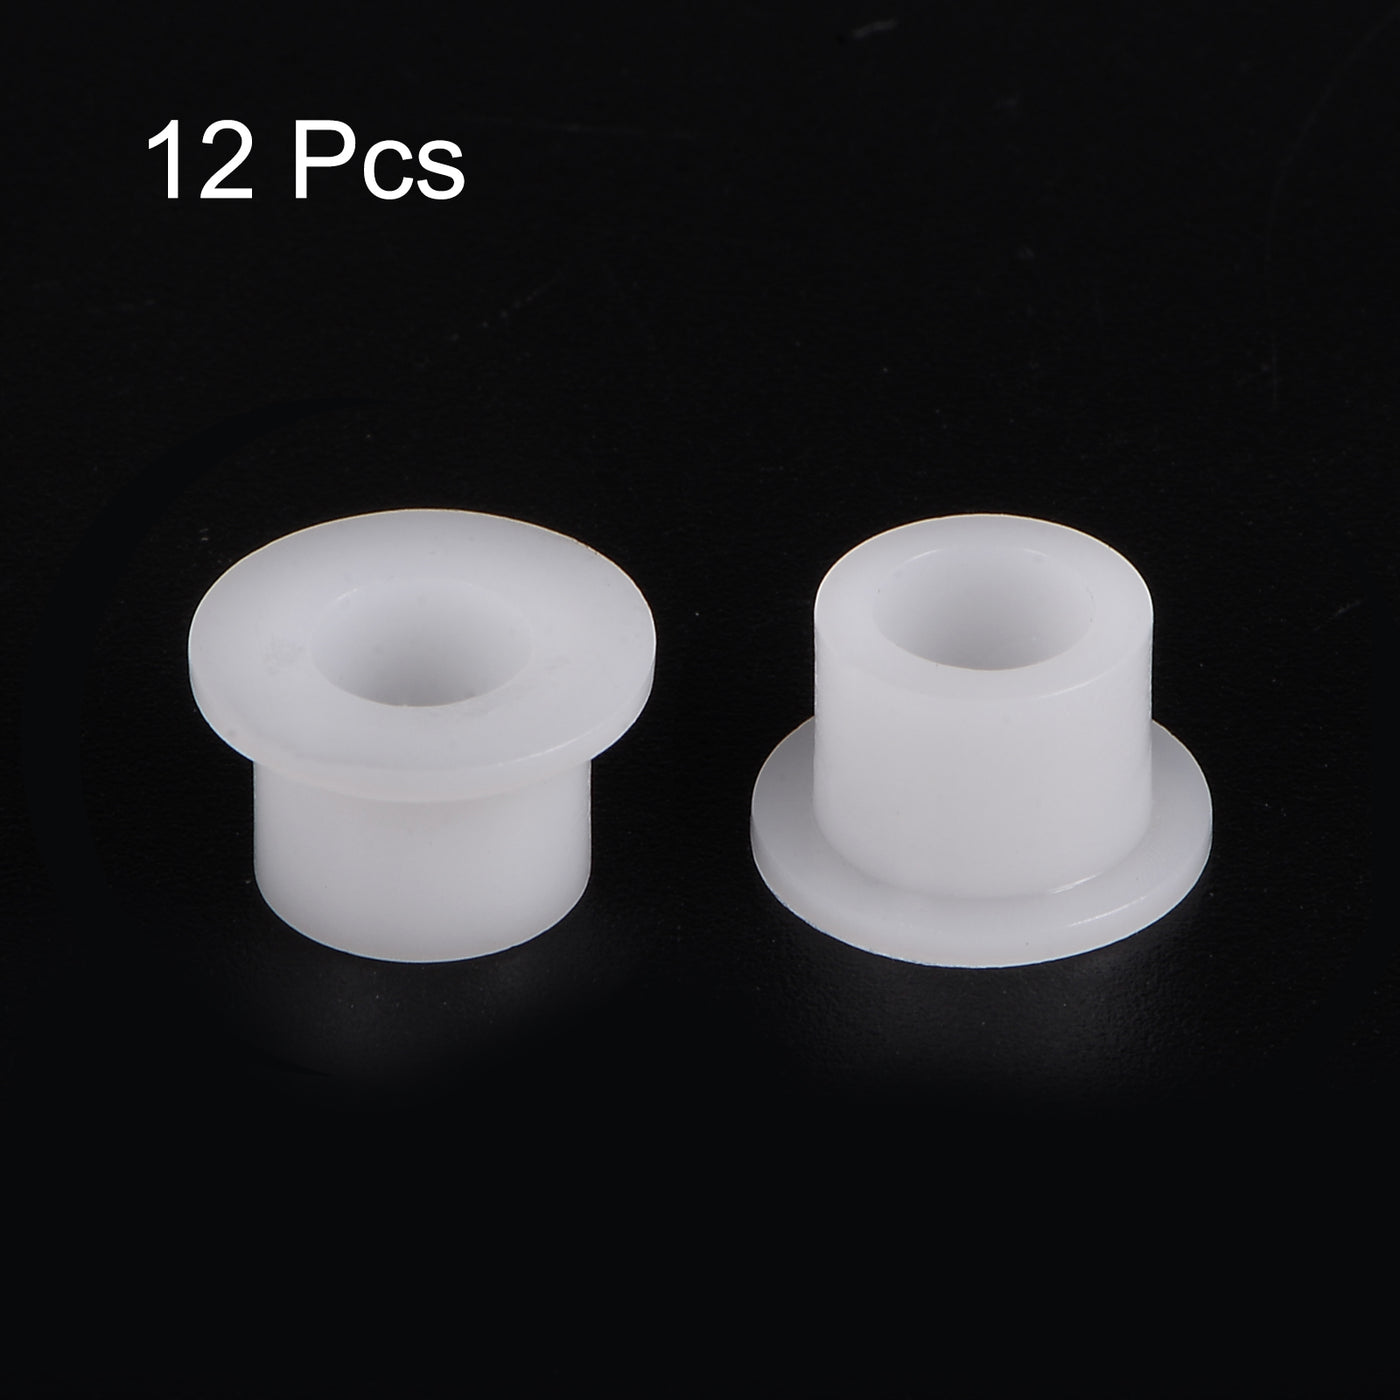 uxcell Uxcell 12pcs Flanged Sleeve Bearings 5.5mm ID 8.5mm OD 7mm Length Nylon Bushings, White